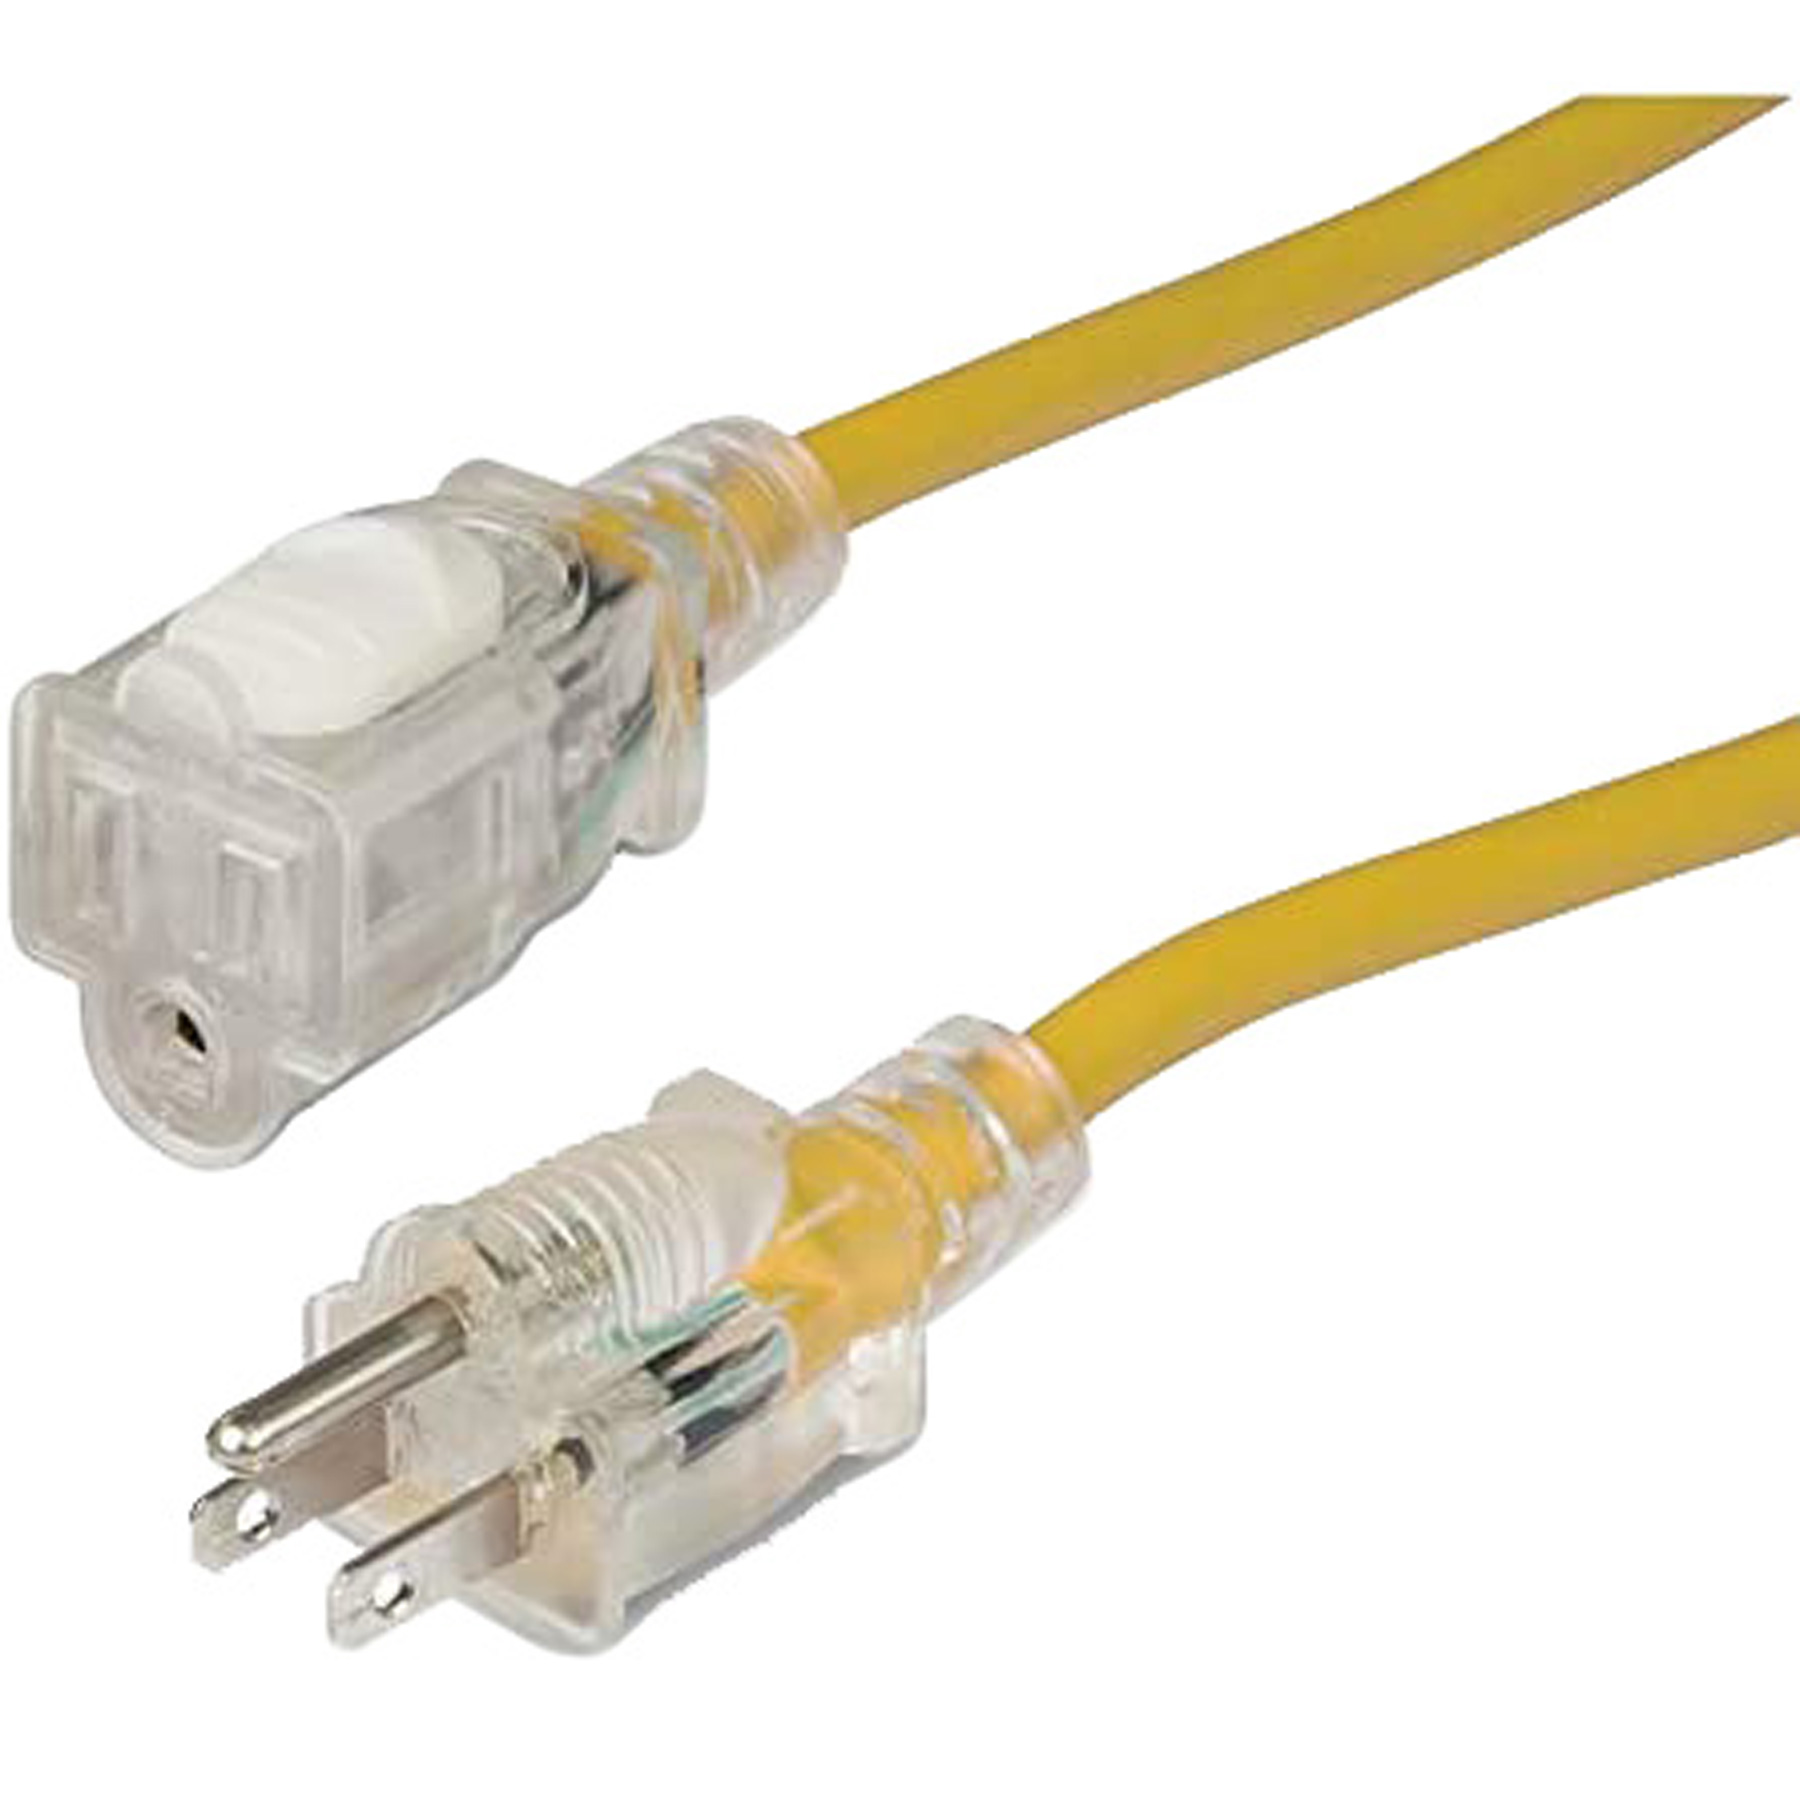 EXT CORD 14/3 25' YELLOW LIGHTED ENDS